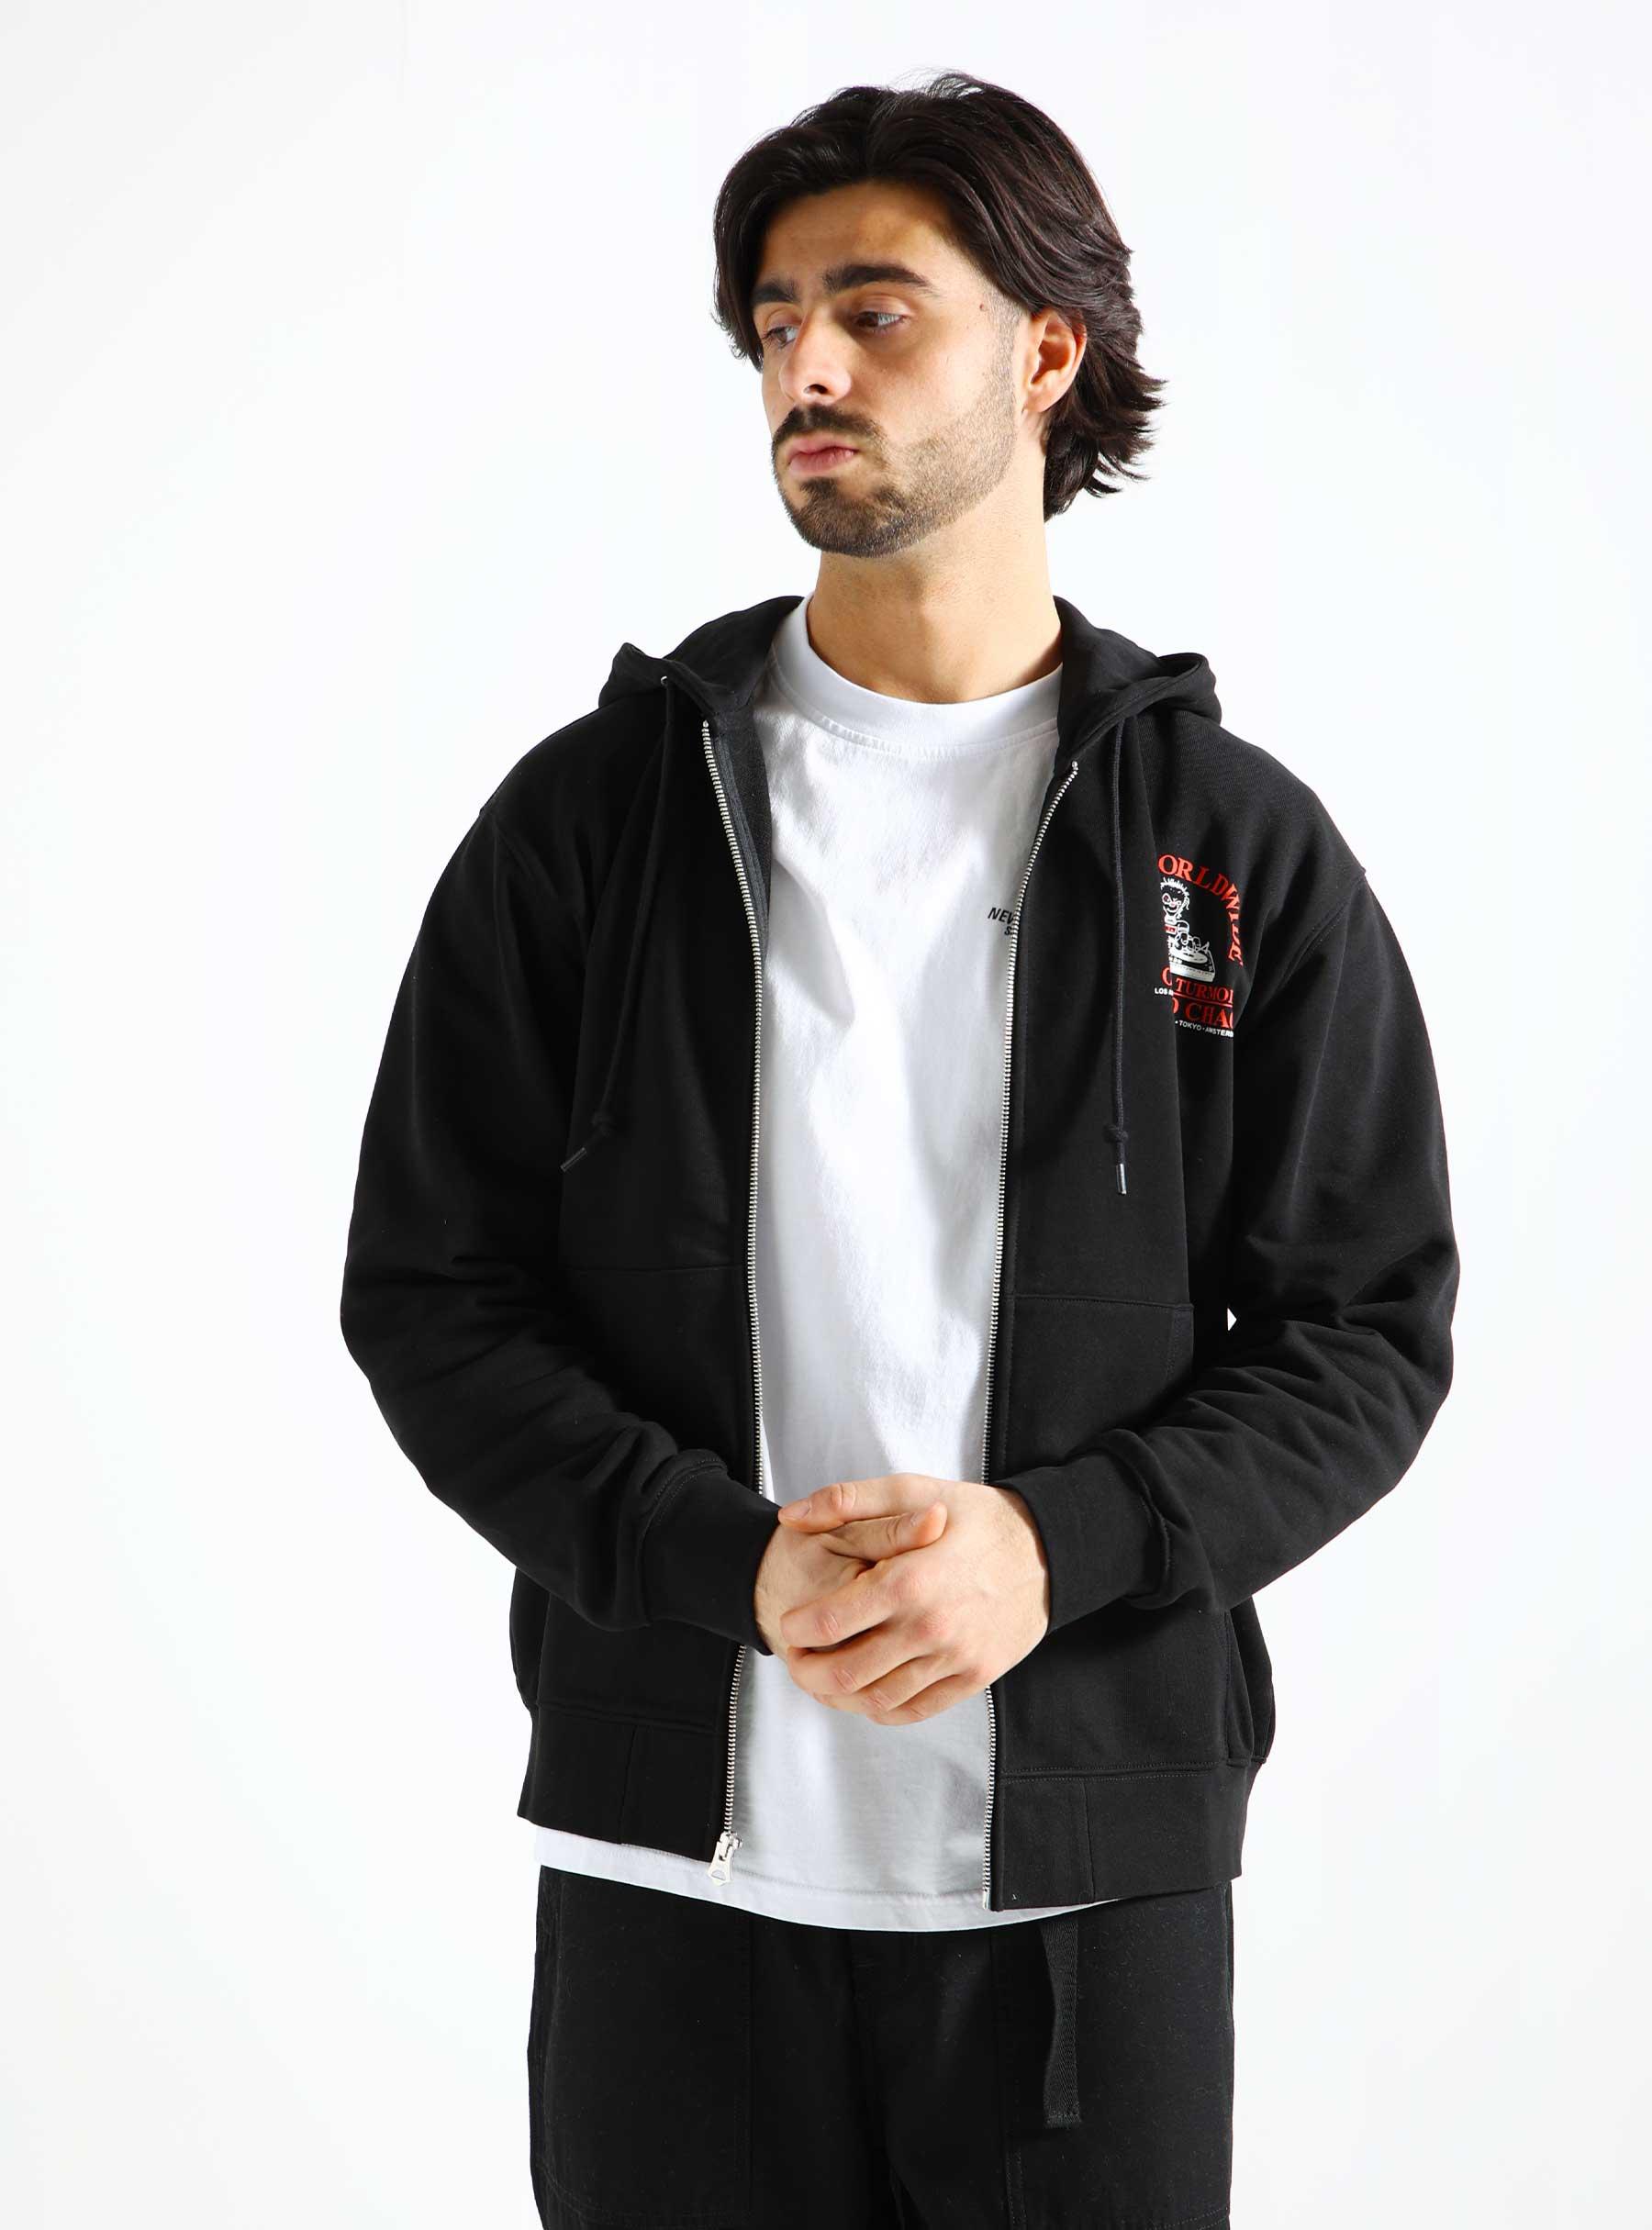 Obey Organizied Chaos Hoodie Black 117483707-BLK